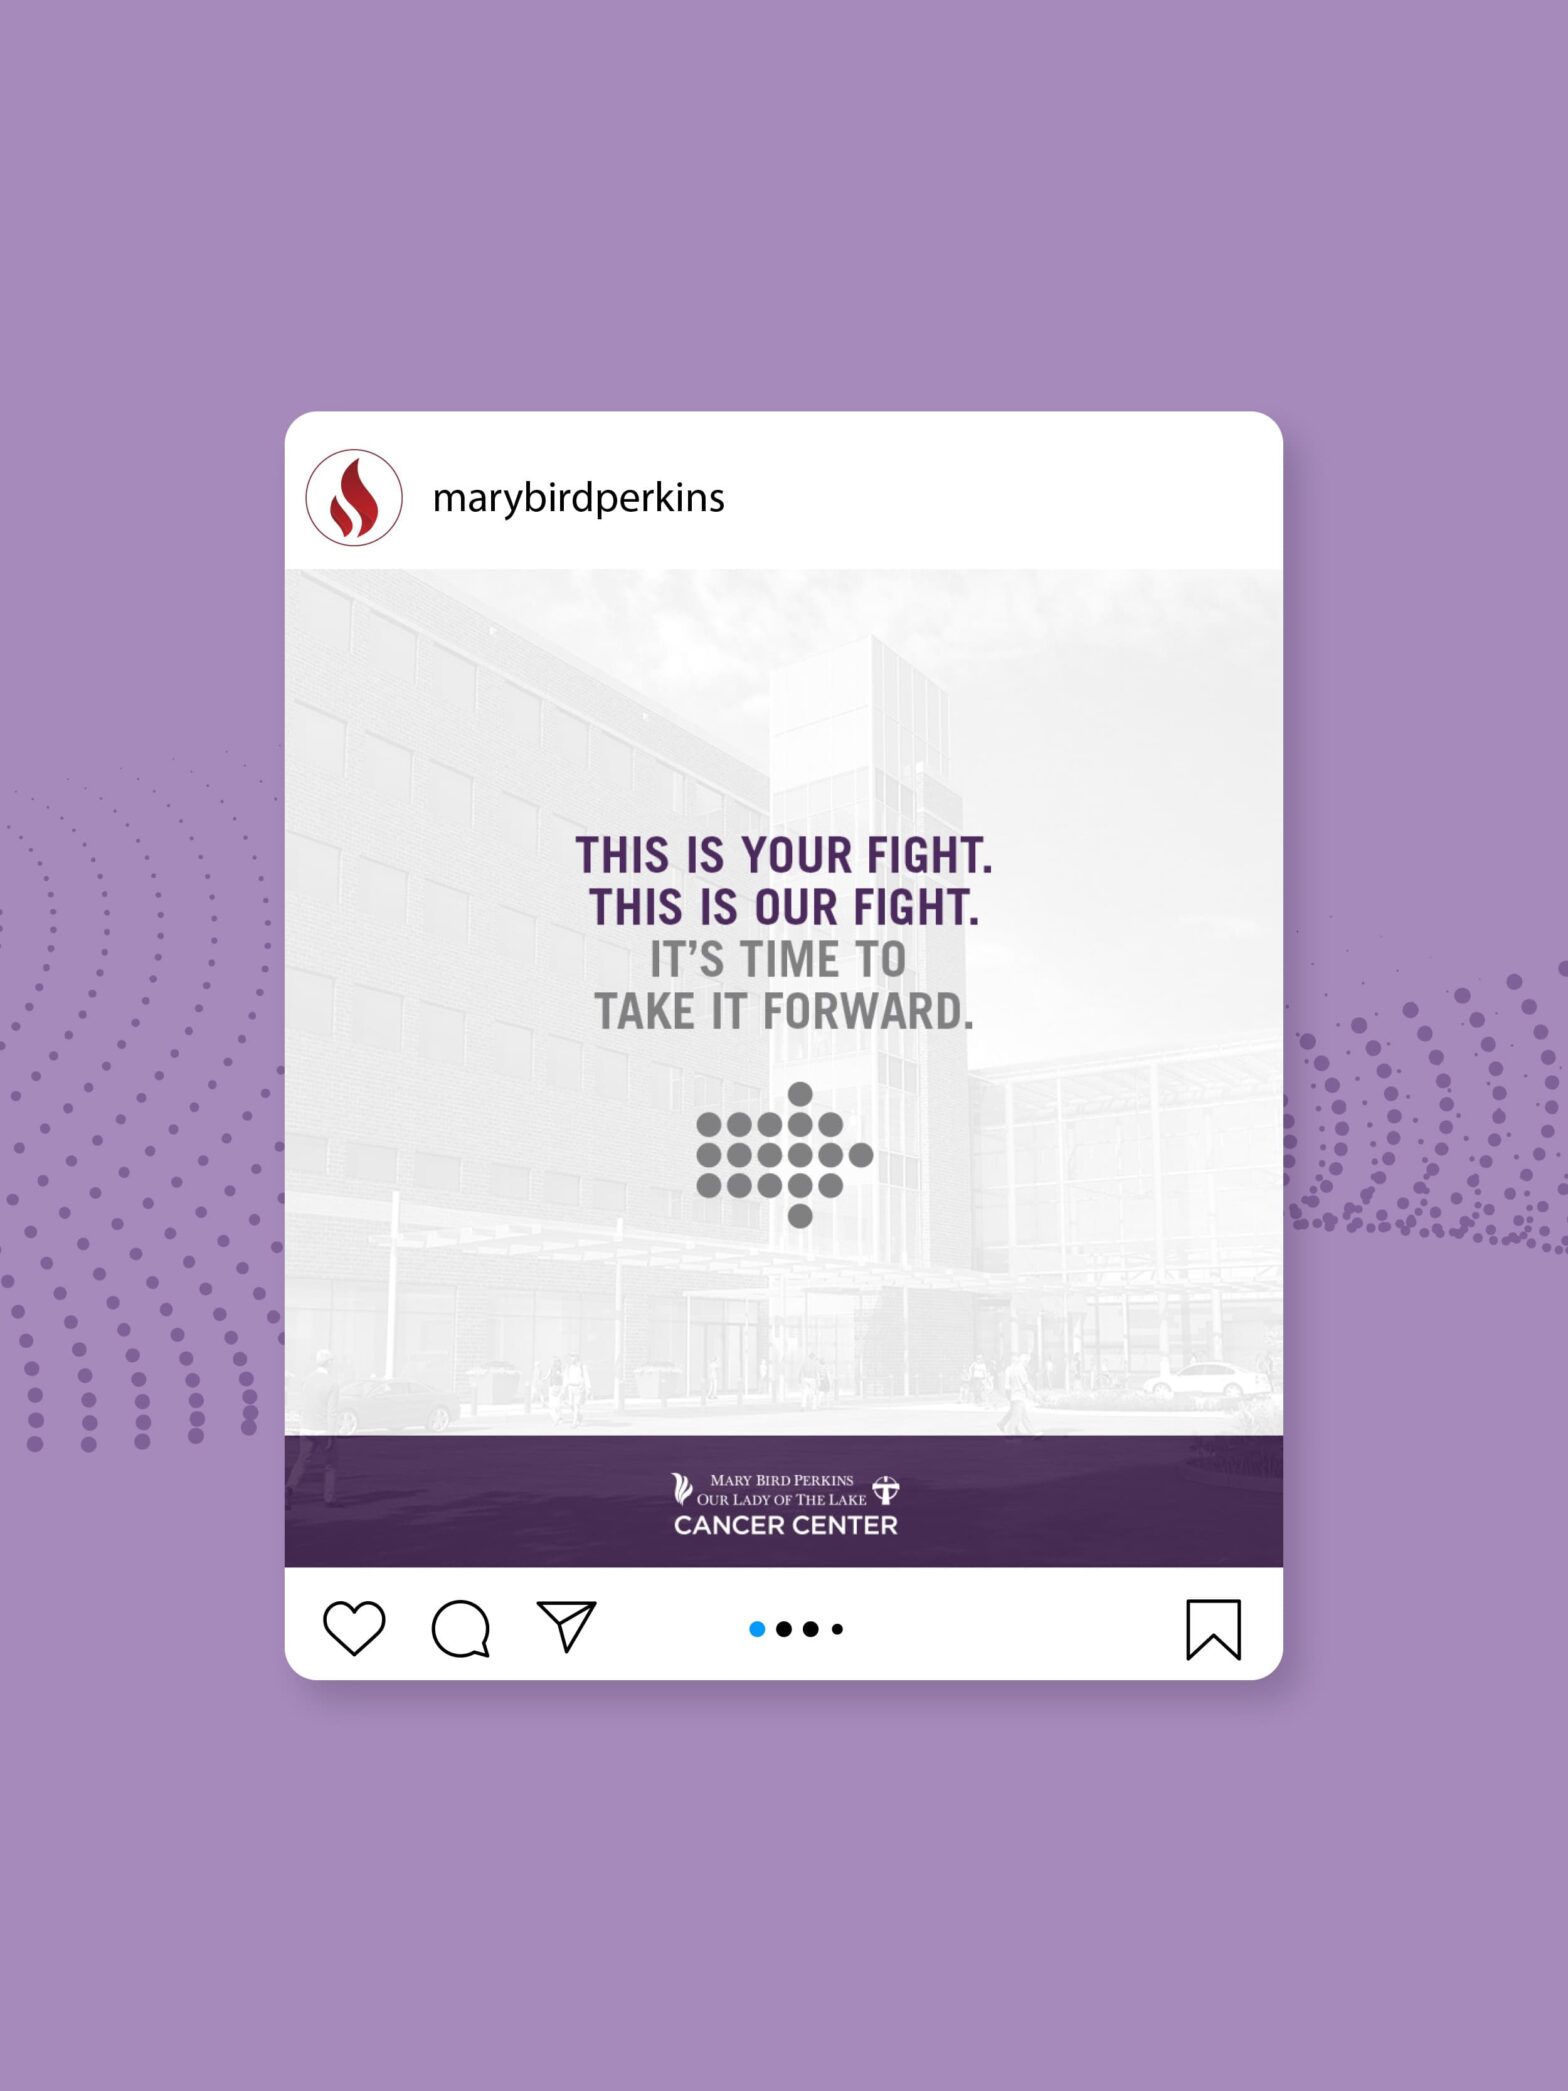 Social media post mockup for "Take the Fight Forward" campaign